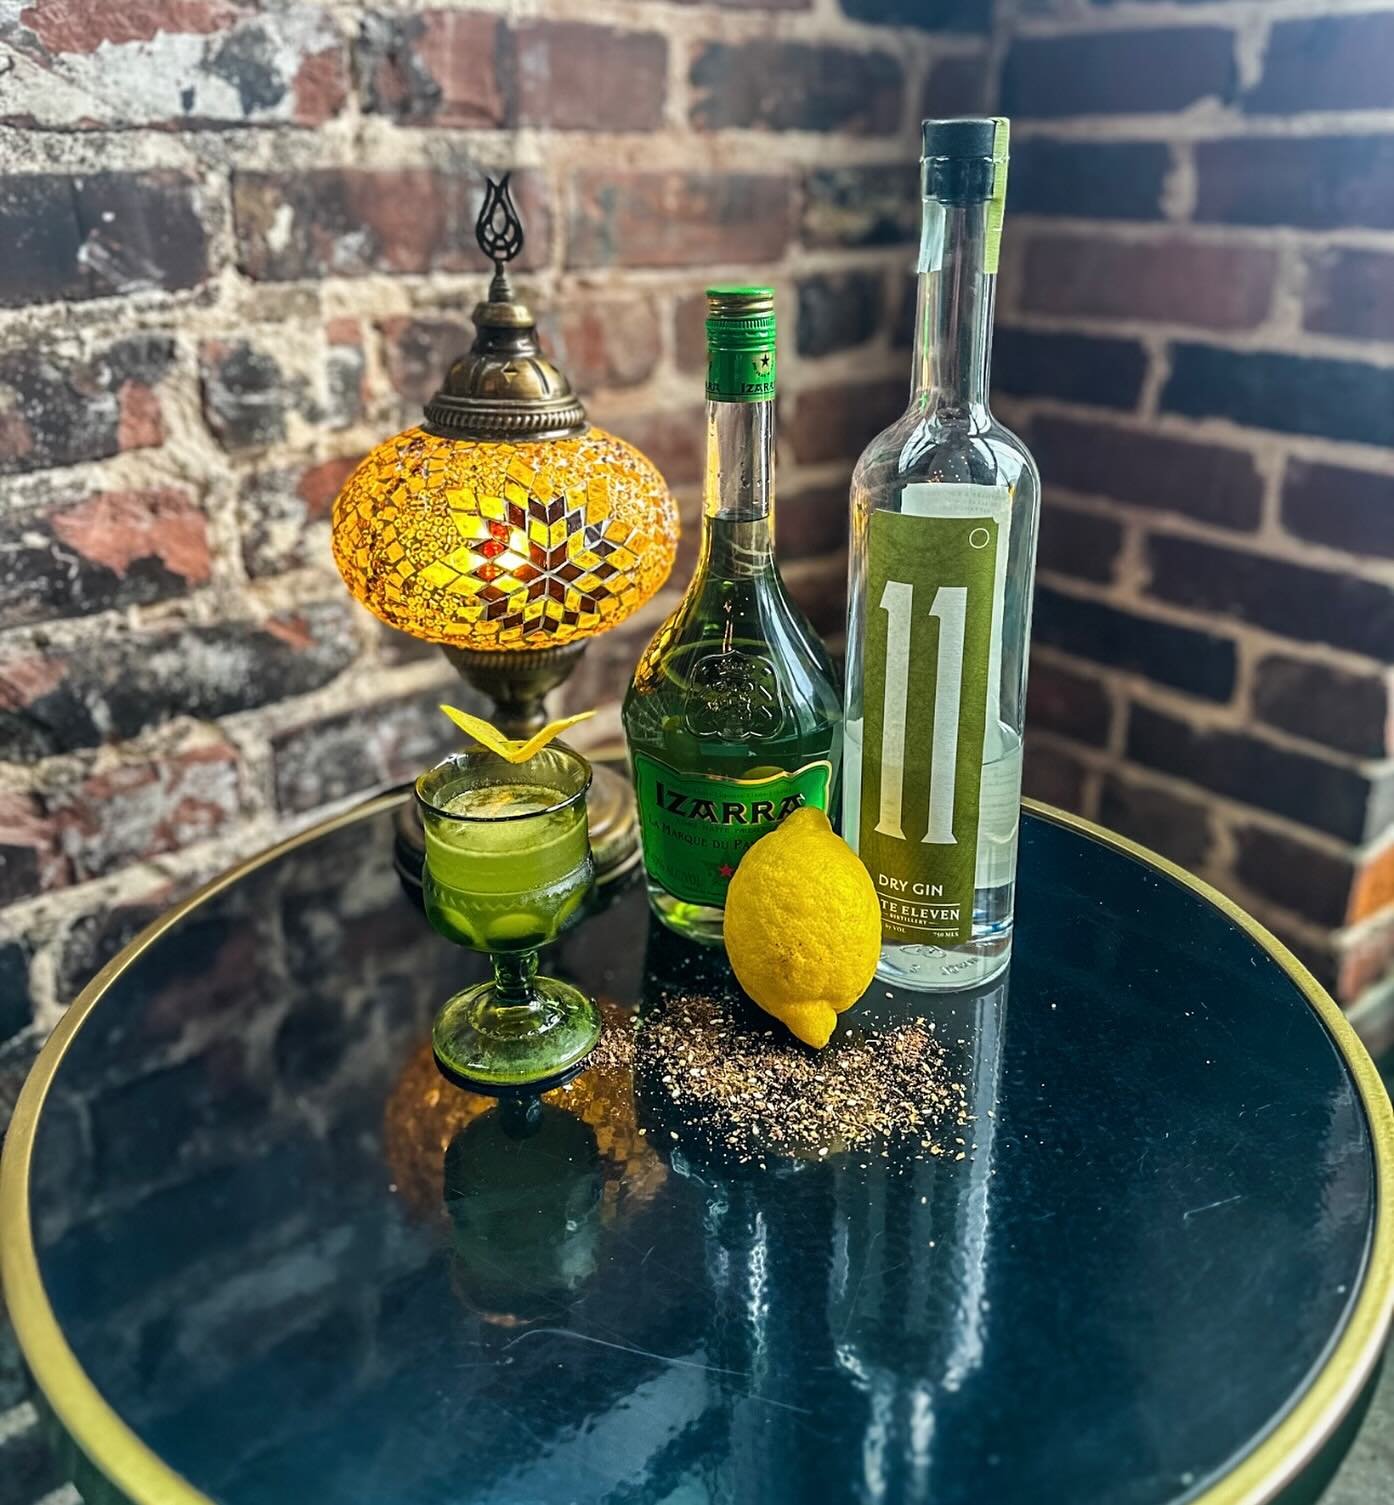 📣 Introducing Calliope&rsquo;s mini Cocktail Tuesday&rsquo;s!!!! 

. This Tuesday The Mad Monk
Gate 11 Gin, Izarra Aperitif, Za&rsquo;atar, &amp; Lemon $7.00

. Next Tuesday will be a different mini Cocktail so come in and try it before it&rsquo;s a